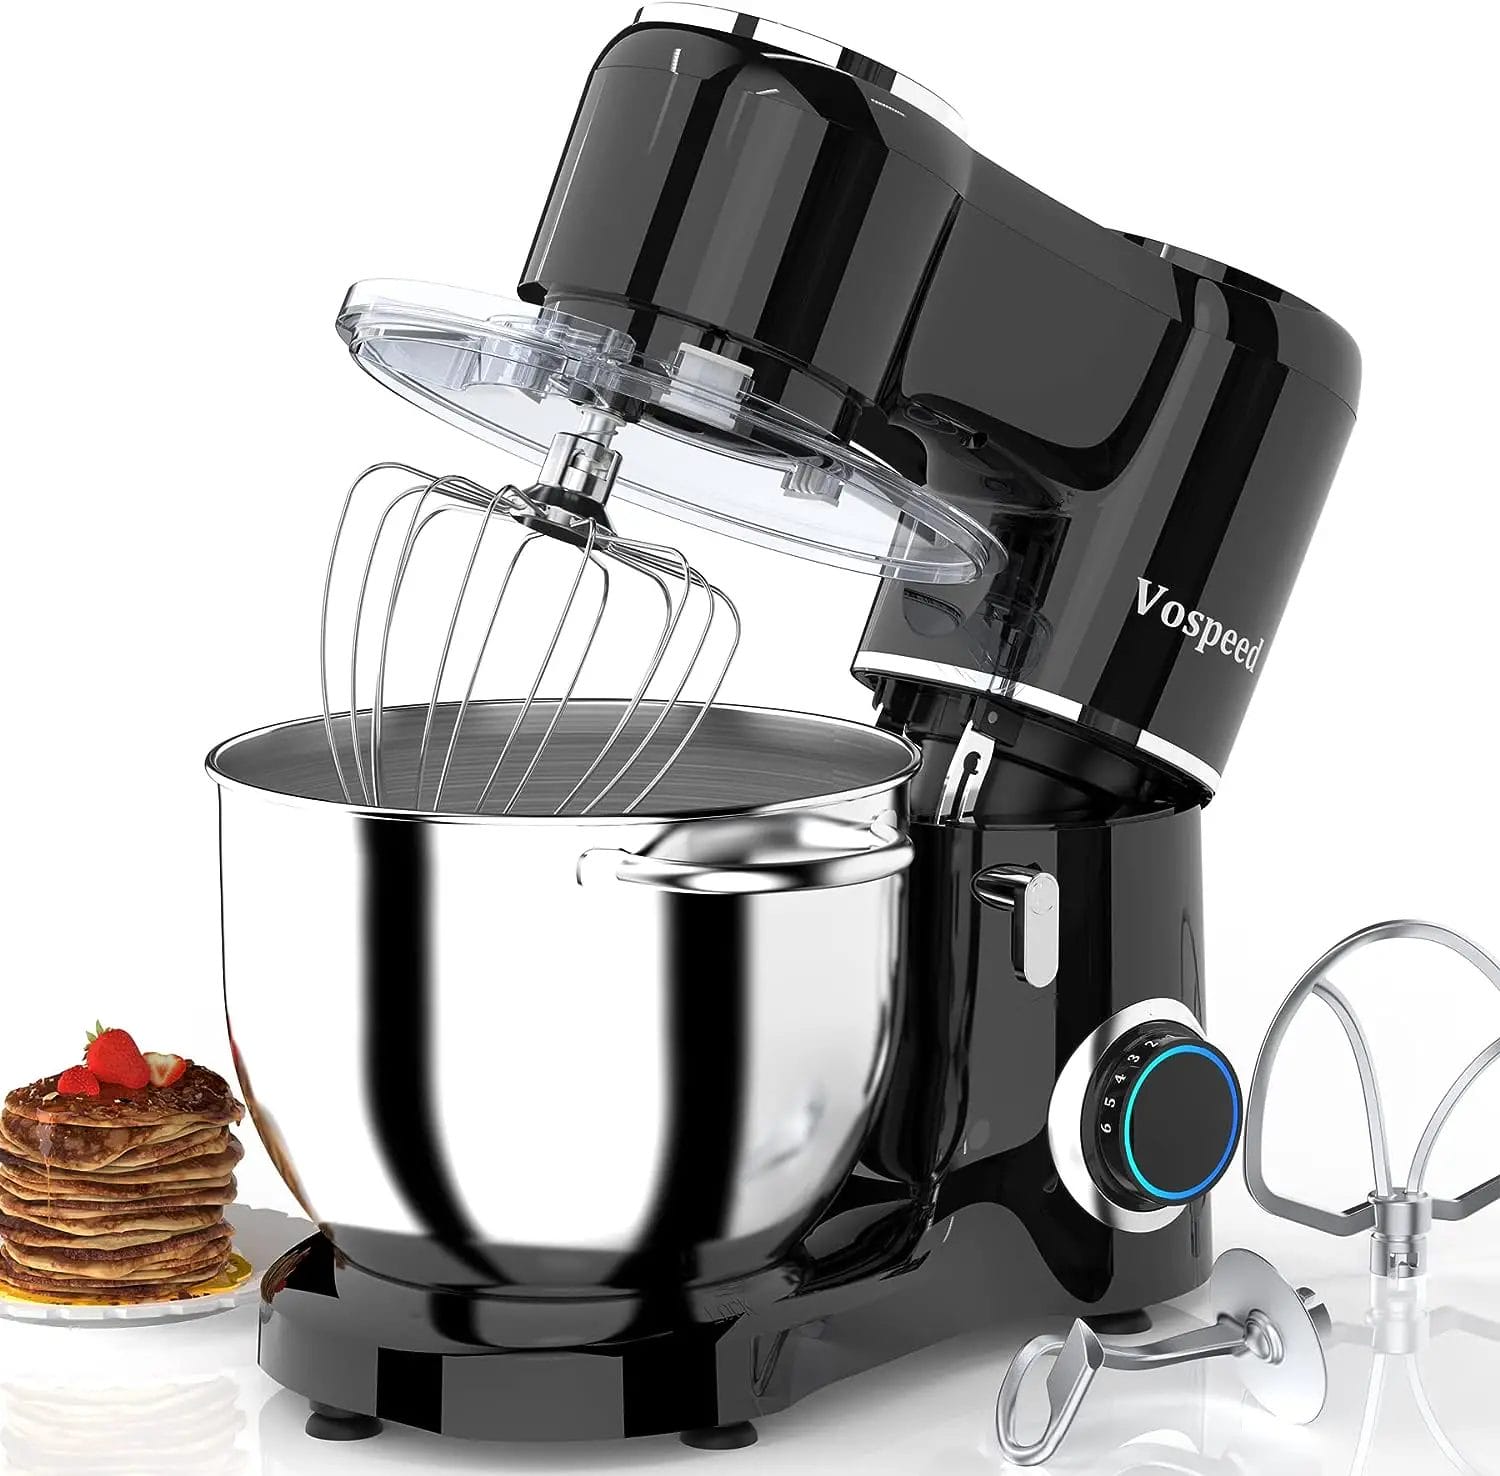 Vospeed Stand Mixer, 660W 6-Speed Tilt-Head Kitchen Mixer with 8.5QT Stainless Steel Mixing Bowl, Beater, Dough Hook, Whisk, Household Use - Black